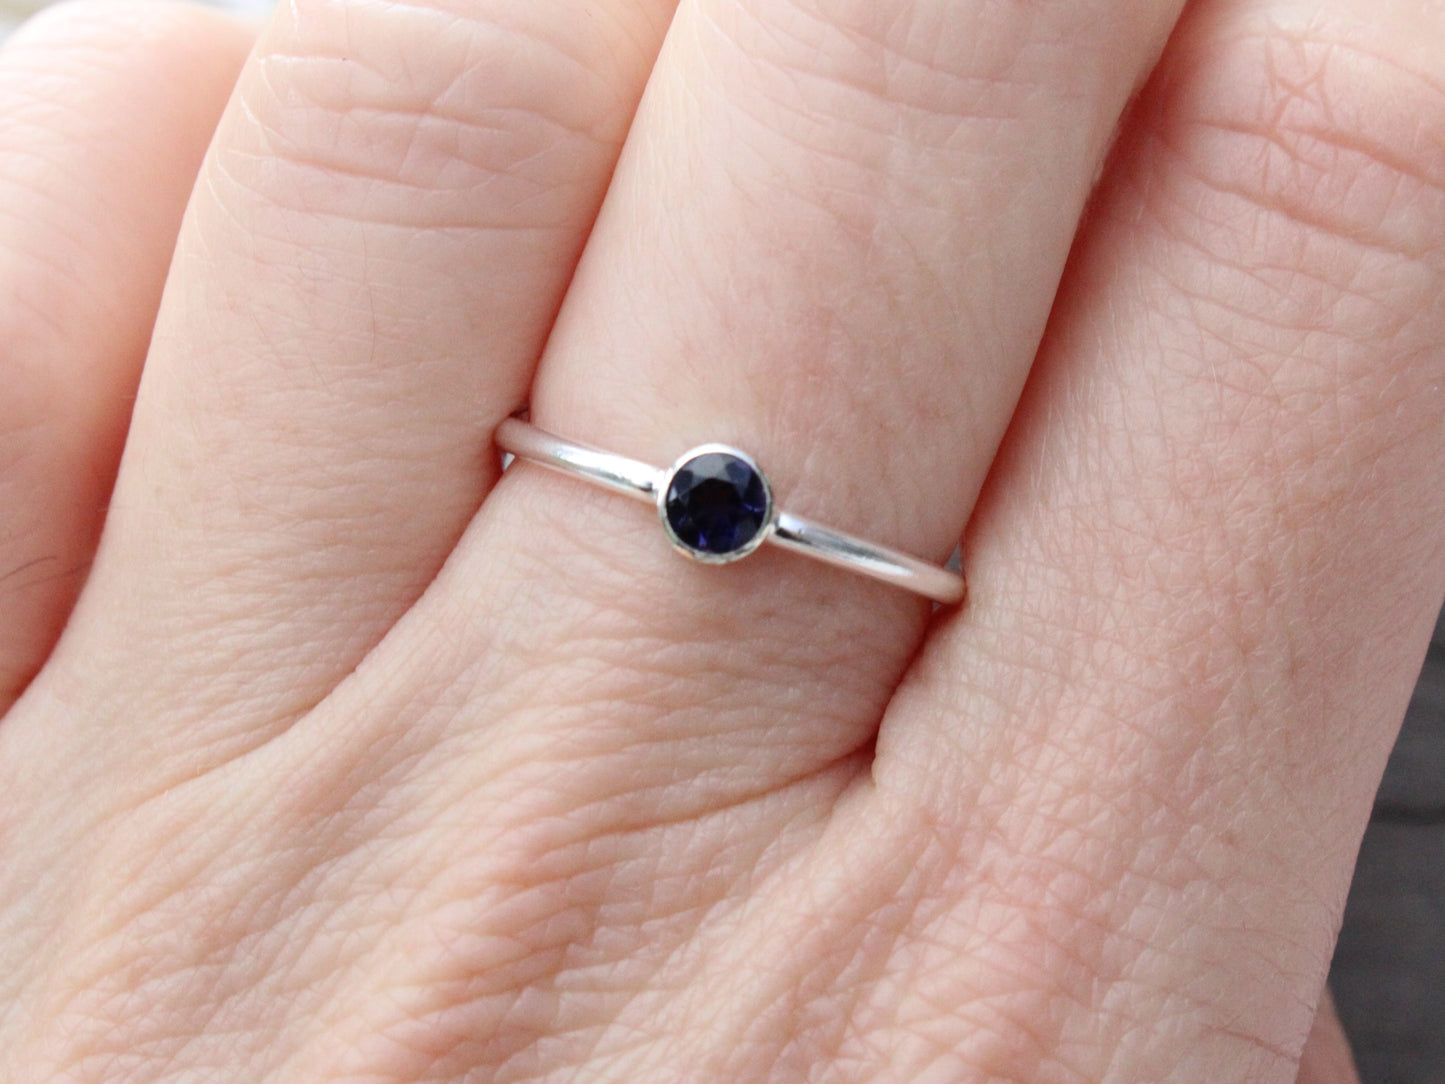 Iolite ring in sterling silver or gold.